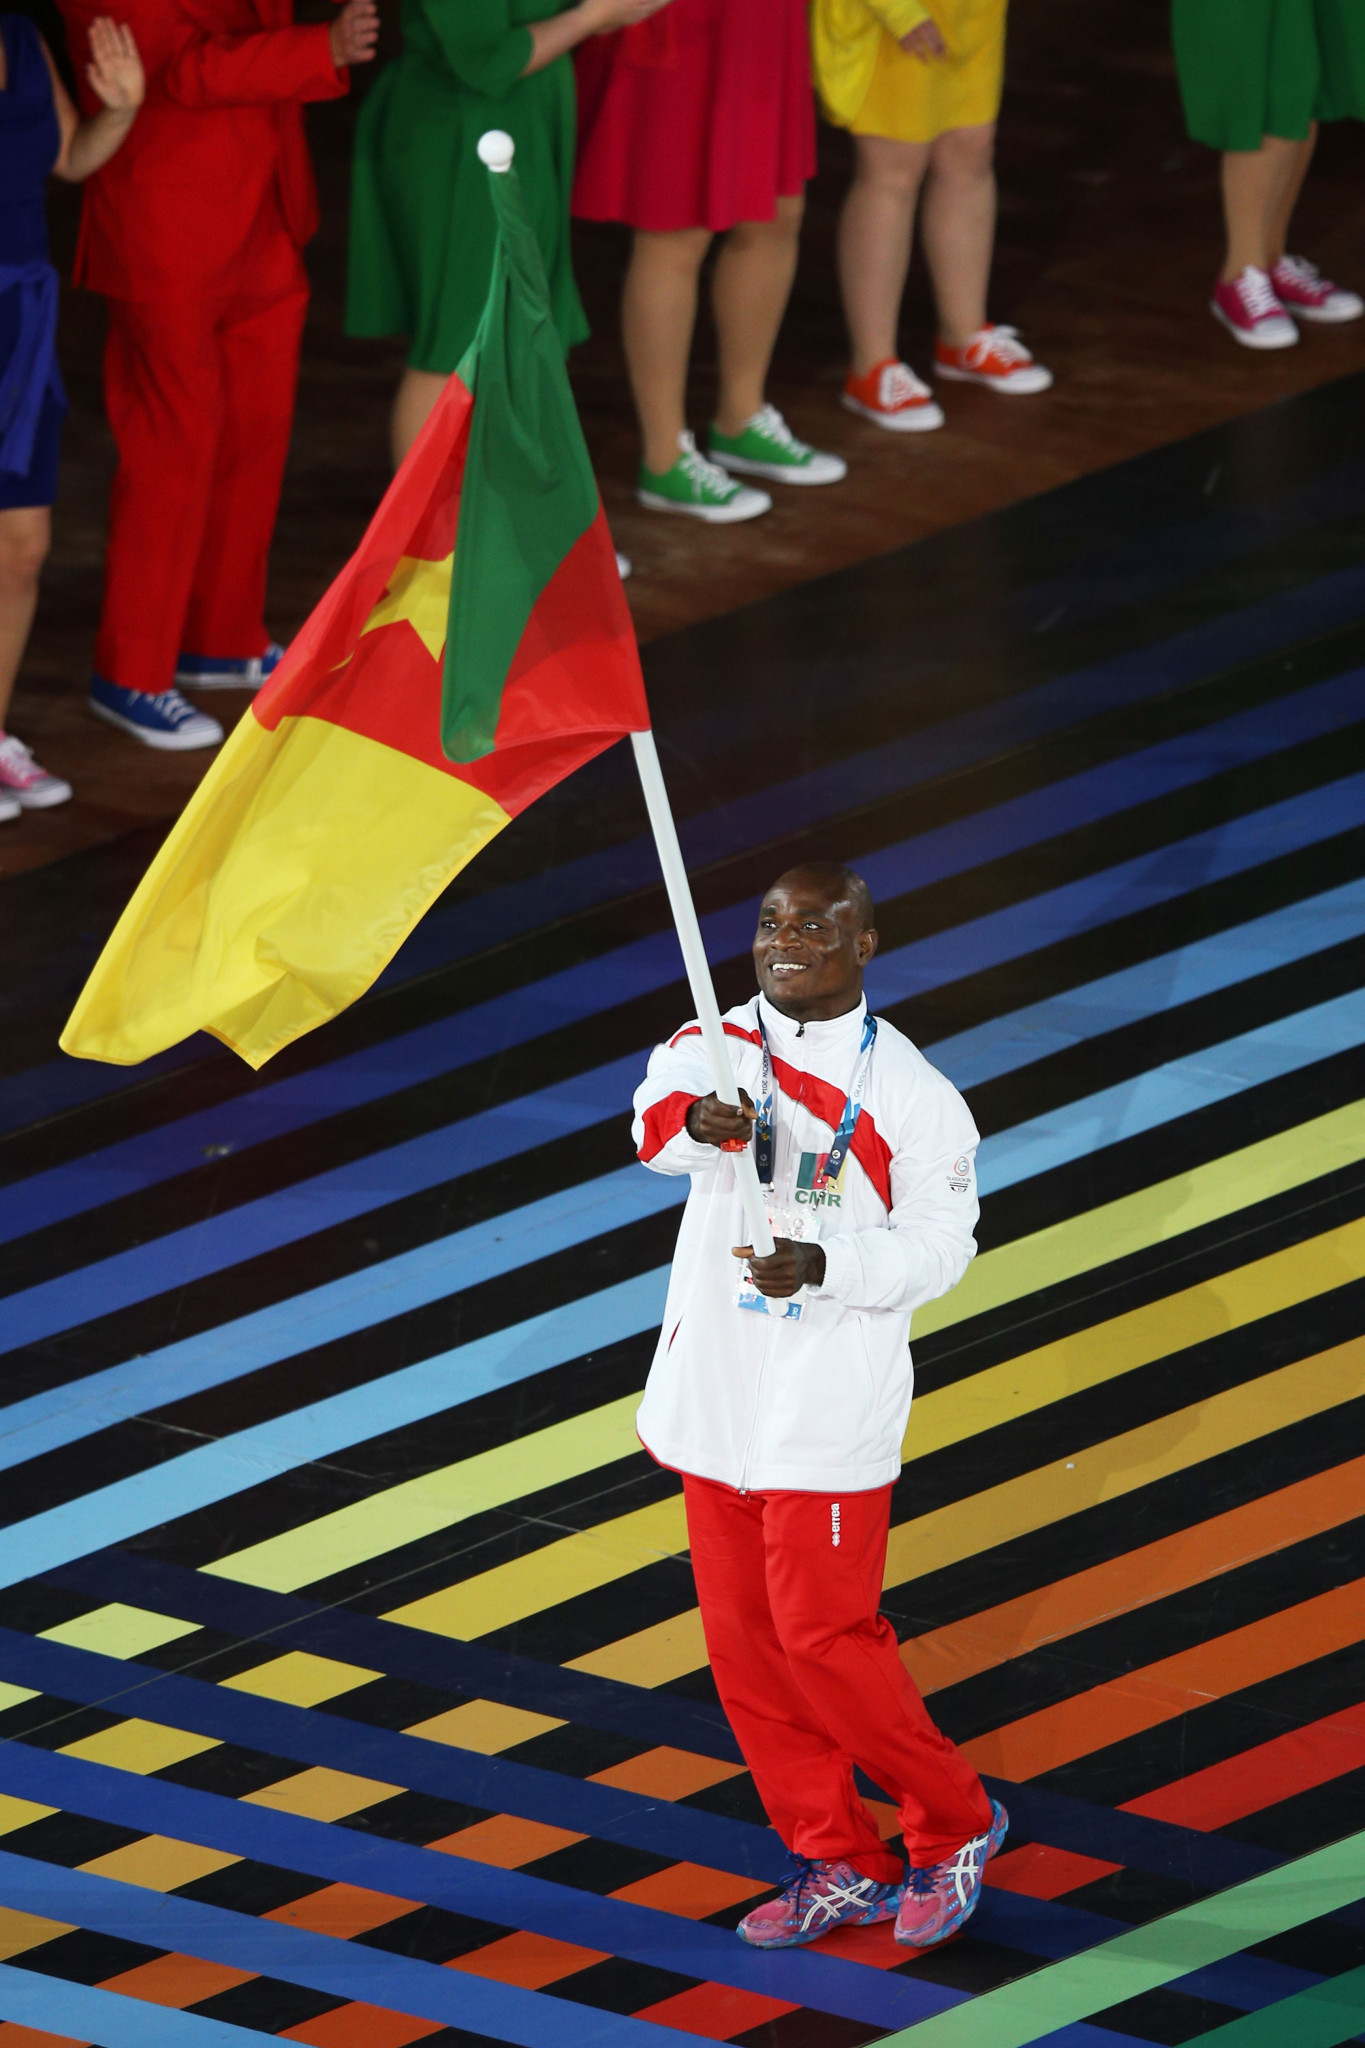 Plans for next year's Commonwealth Games in the Gold Coast was discussed by the Cameroon National Olympic and Sports Committee and how they will improve on their performance at Glasgow 2014 ©Getty Images